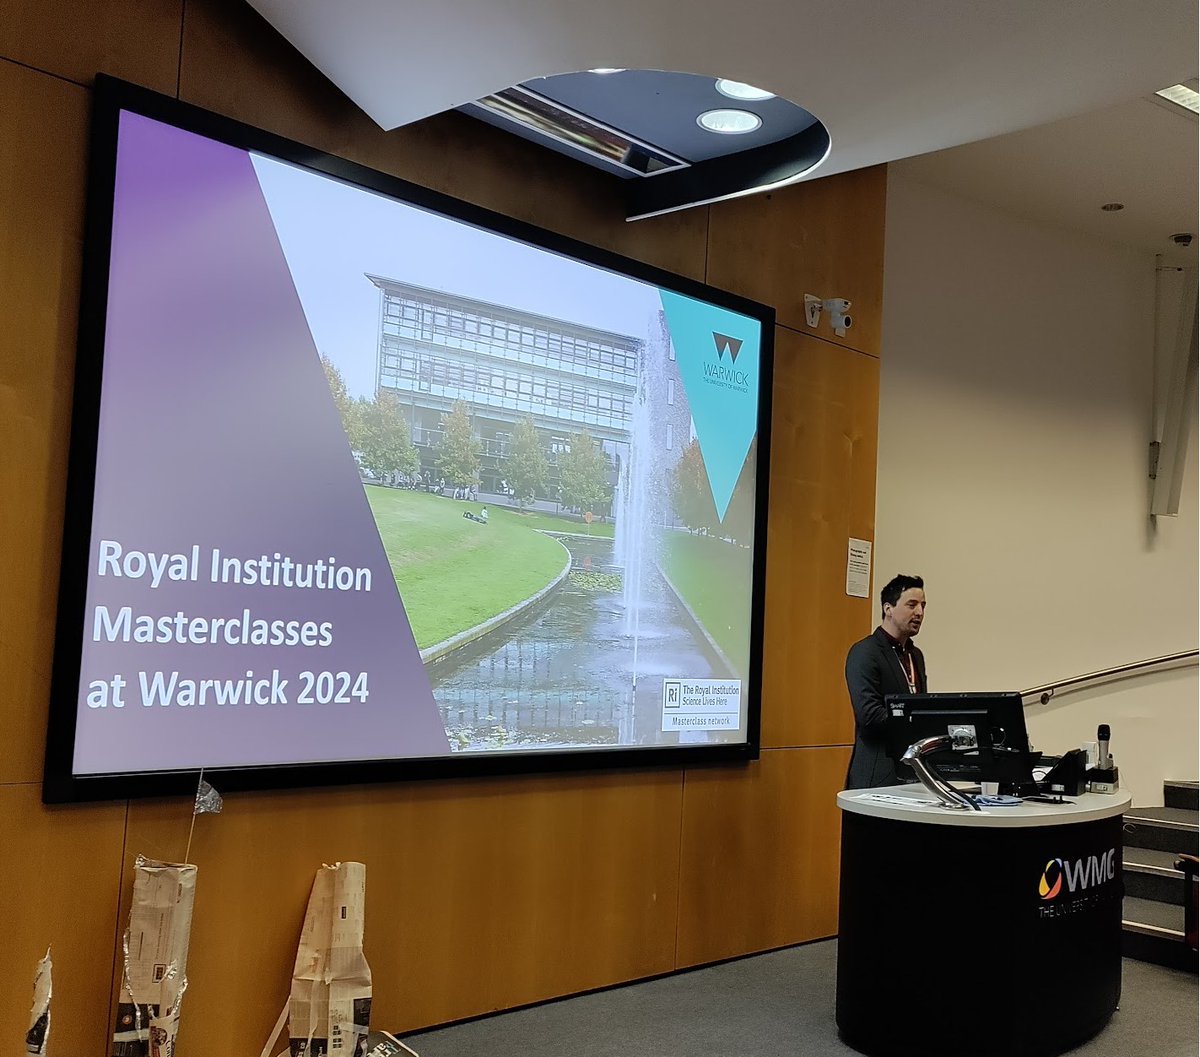 On Saturday we celebrated the achievements of year 9 students attending the @Ri_Science #masterclasses @uniofwarwick. @YeWanDae gave an inspirational talk to students & their parents. @Philjemmett led #Engineering & Helena Verrill #Maths #bsw24 @wmgwarwick @warwickmaths